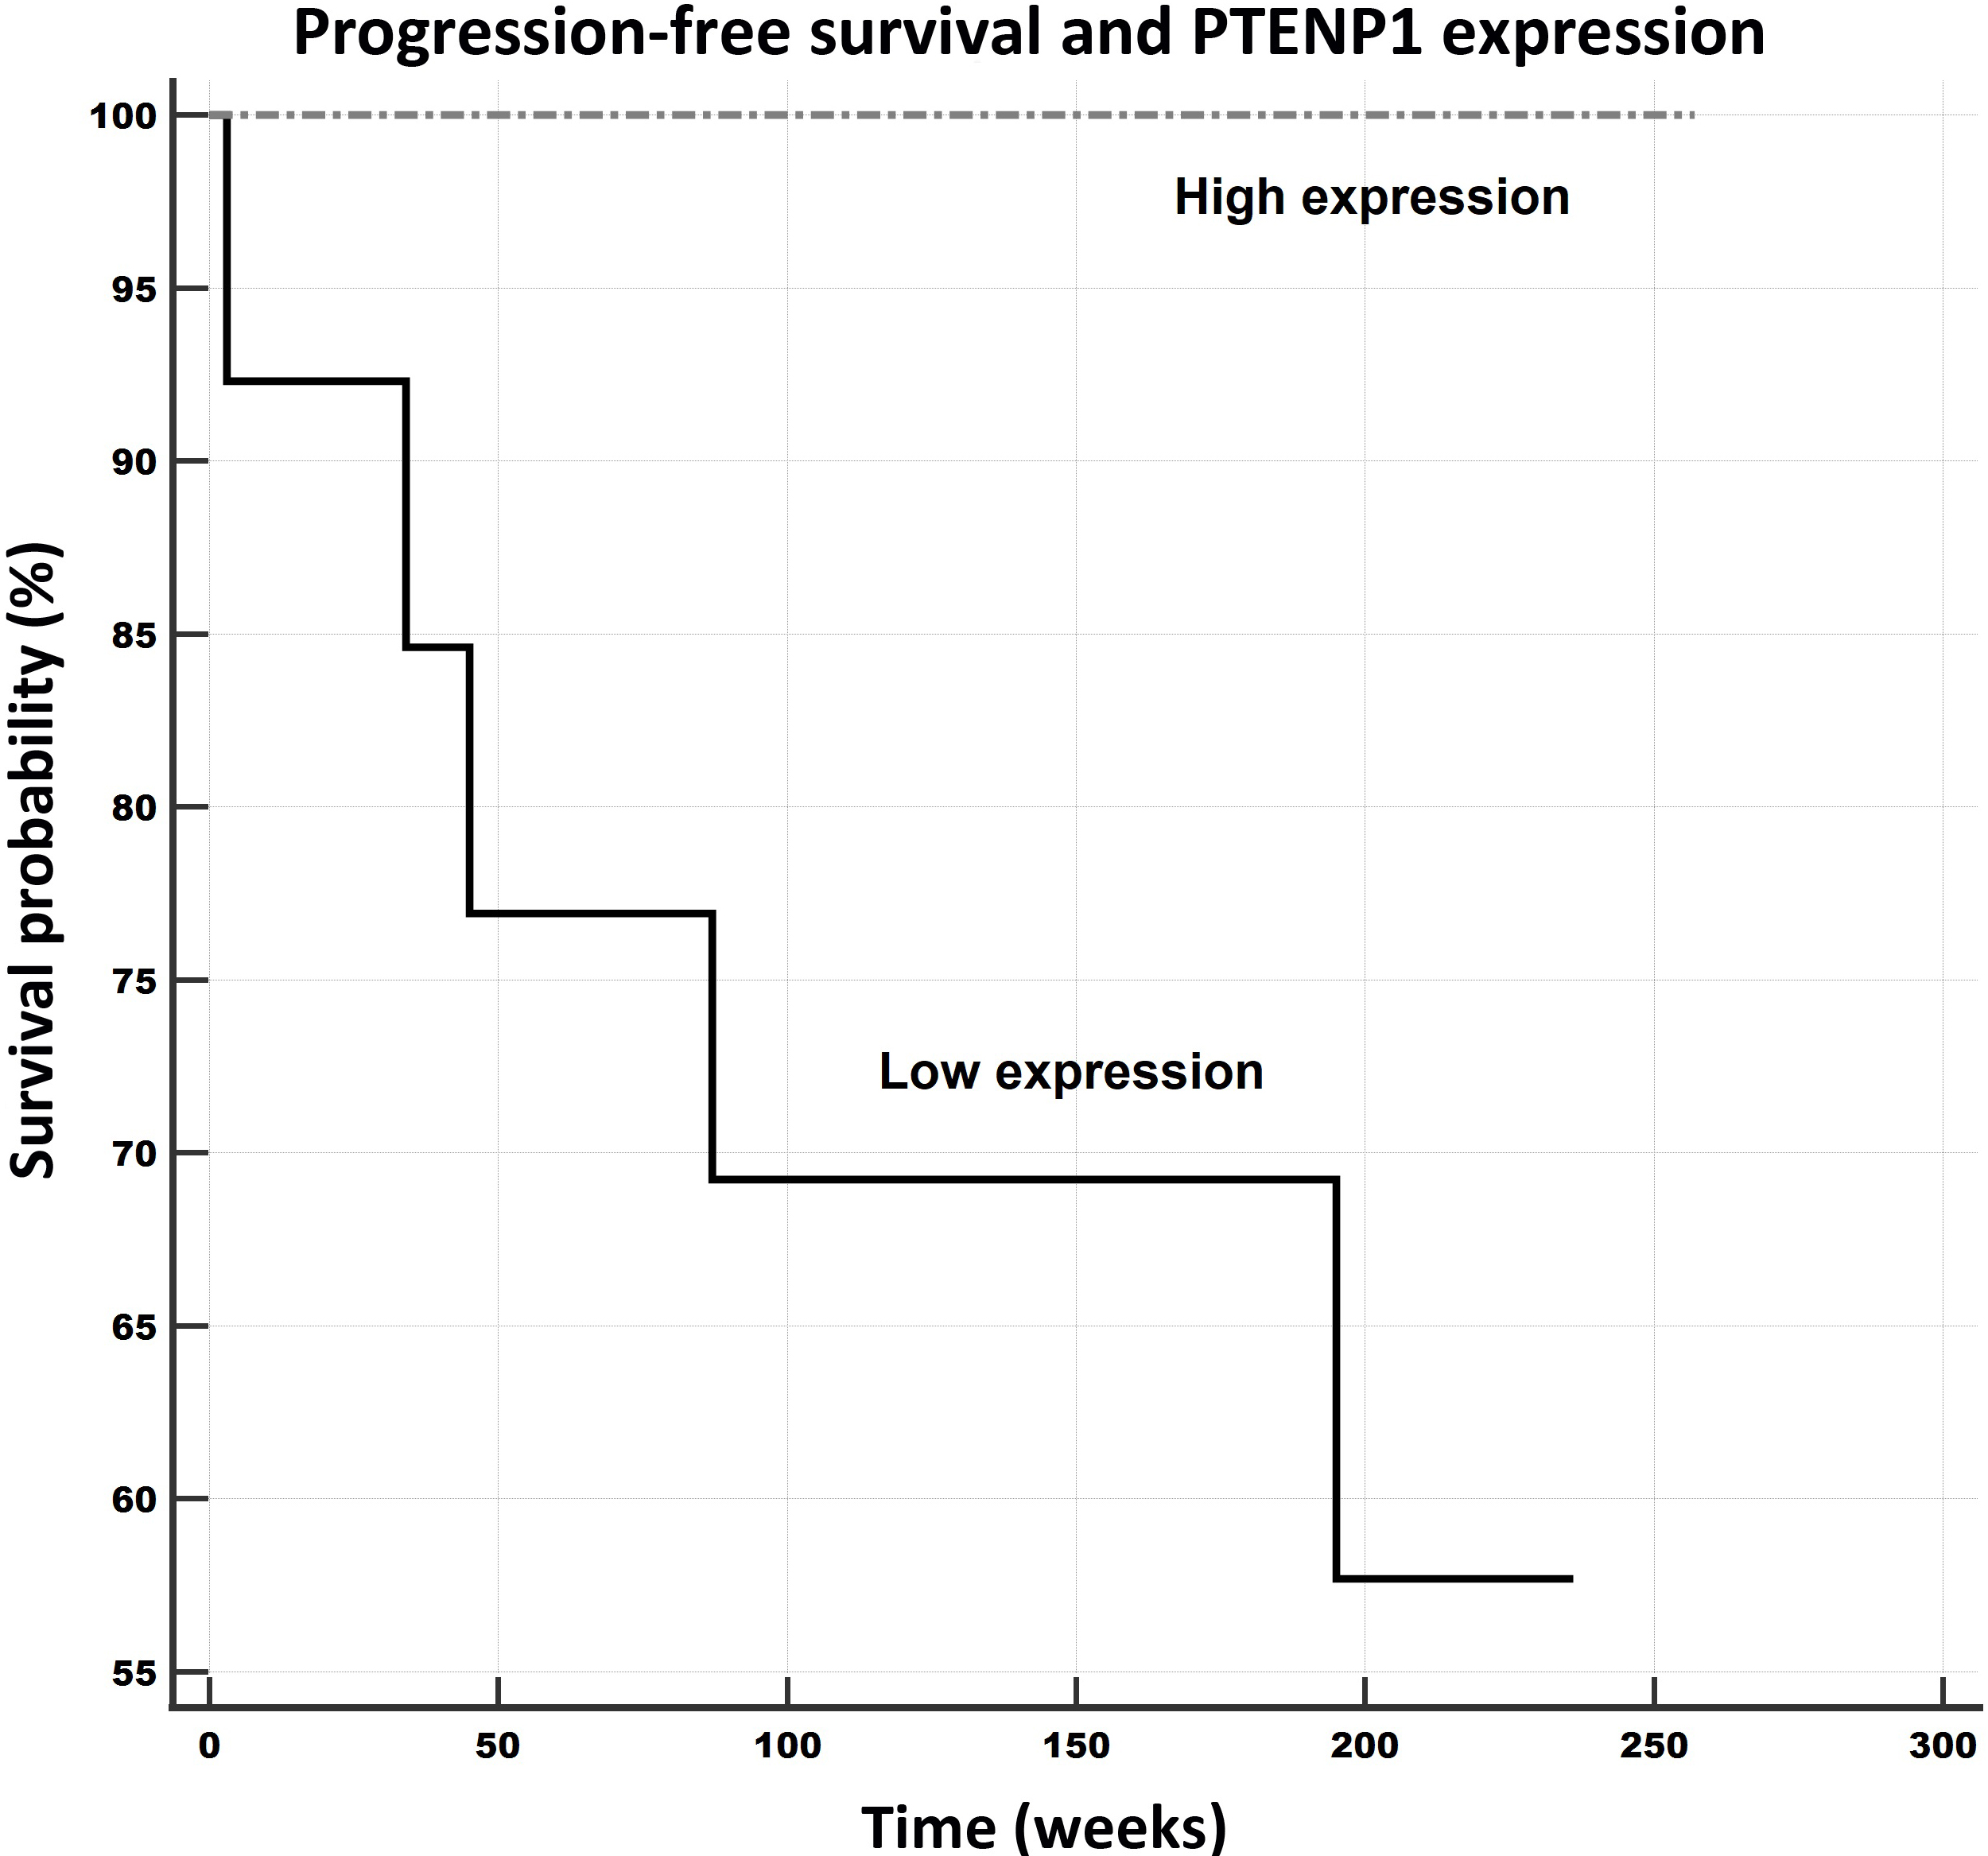 Progression-free survival in relation to PTENP1 expression levels. Notes: Univariate Kaplan-Meier survival curves for progression-free survival (PFS) related to low and high concentrations of PTENP1 in breast cancer tumors. Mean PFS for the low expression subgroup was 3.3 years (171.7 weeks), and for the high expression subgroup it was 4.9 years (257 weeks).